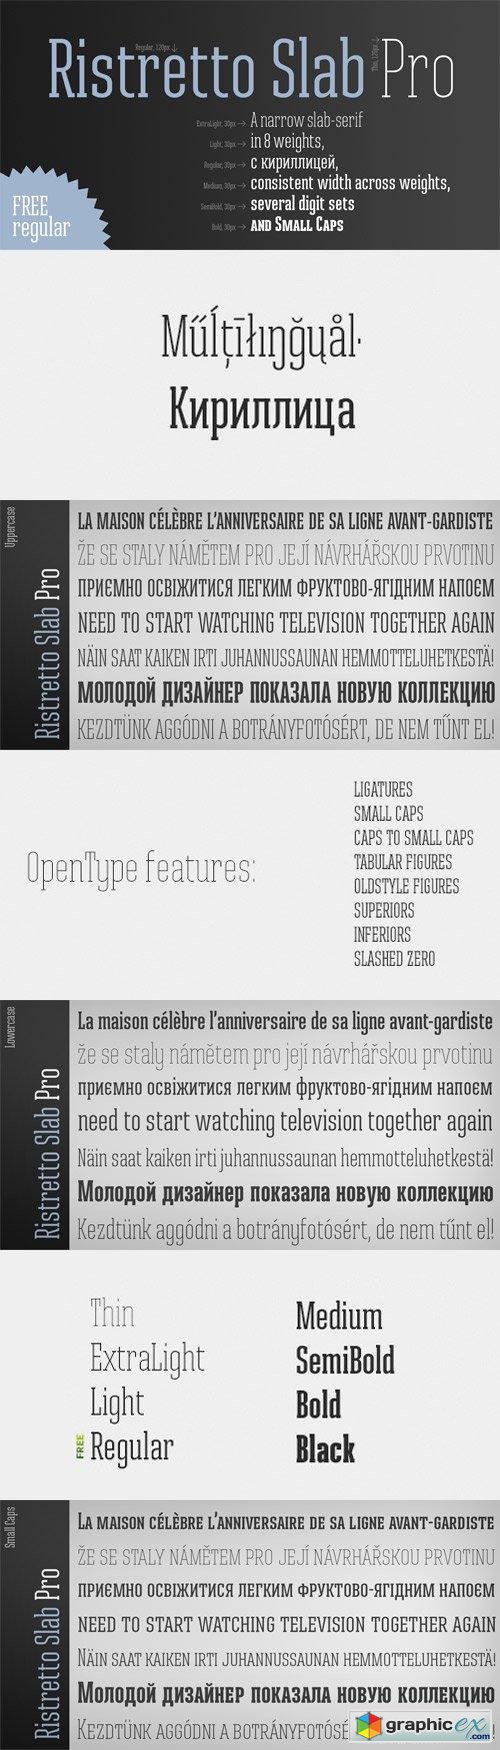 Ristretto Slab Pro Font Family - 8 Fonts for $140